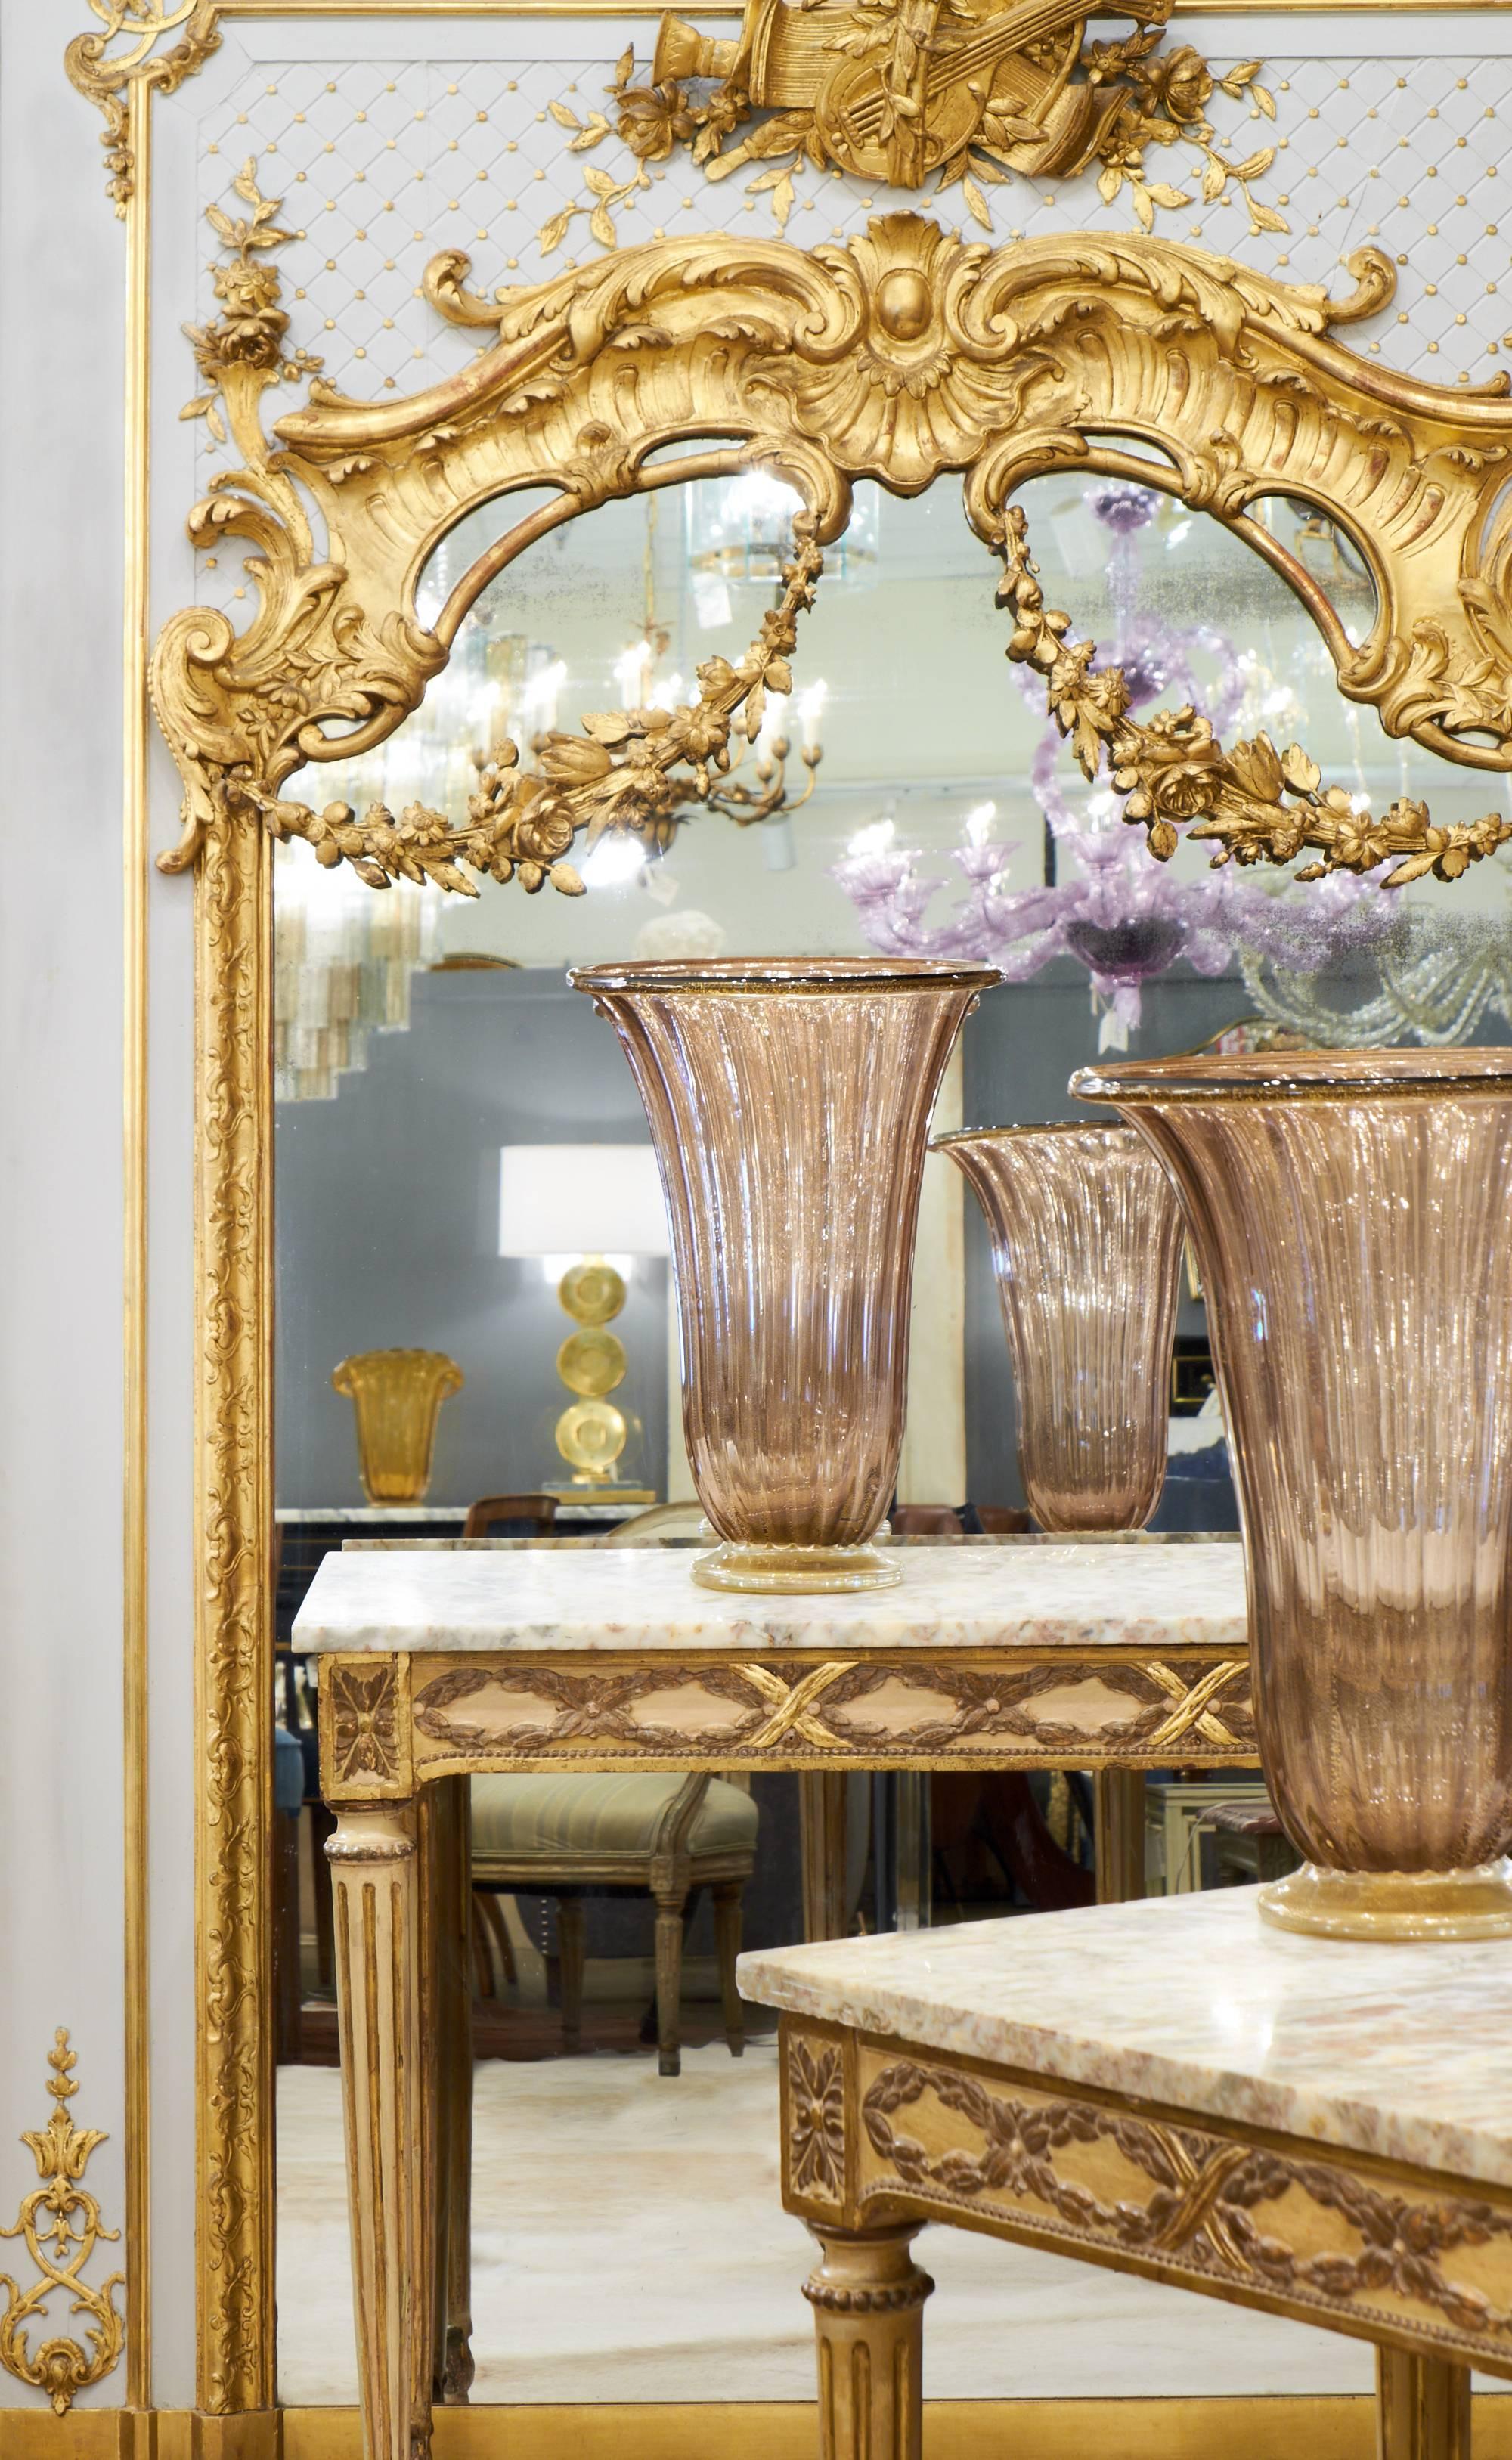 Resplendent French, Louis XVI style trumeau with magnificent, hand-carved, gold leafed décor surrounding the original mercury glass mirror. The central fronton features a lyre, music sheets and flowers. Superb carved details throughout, including